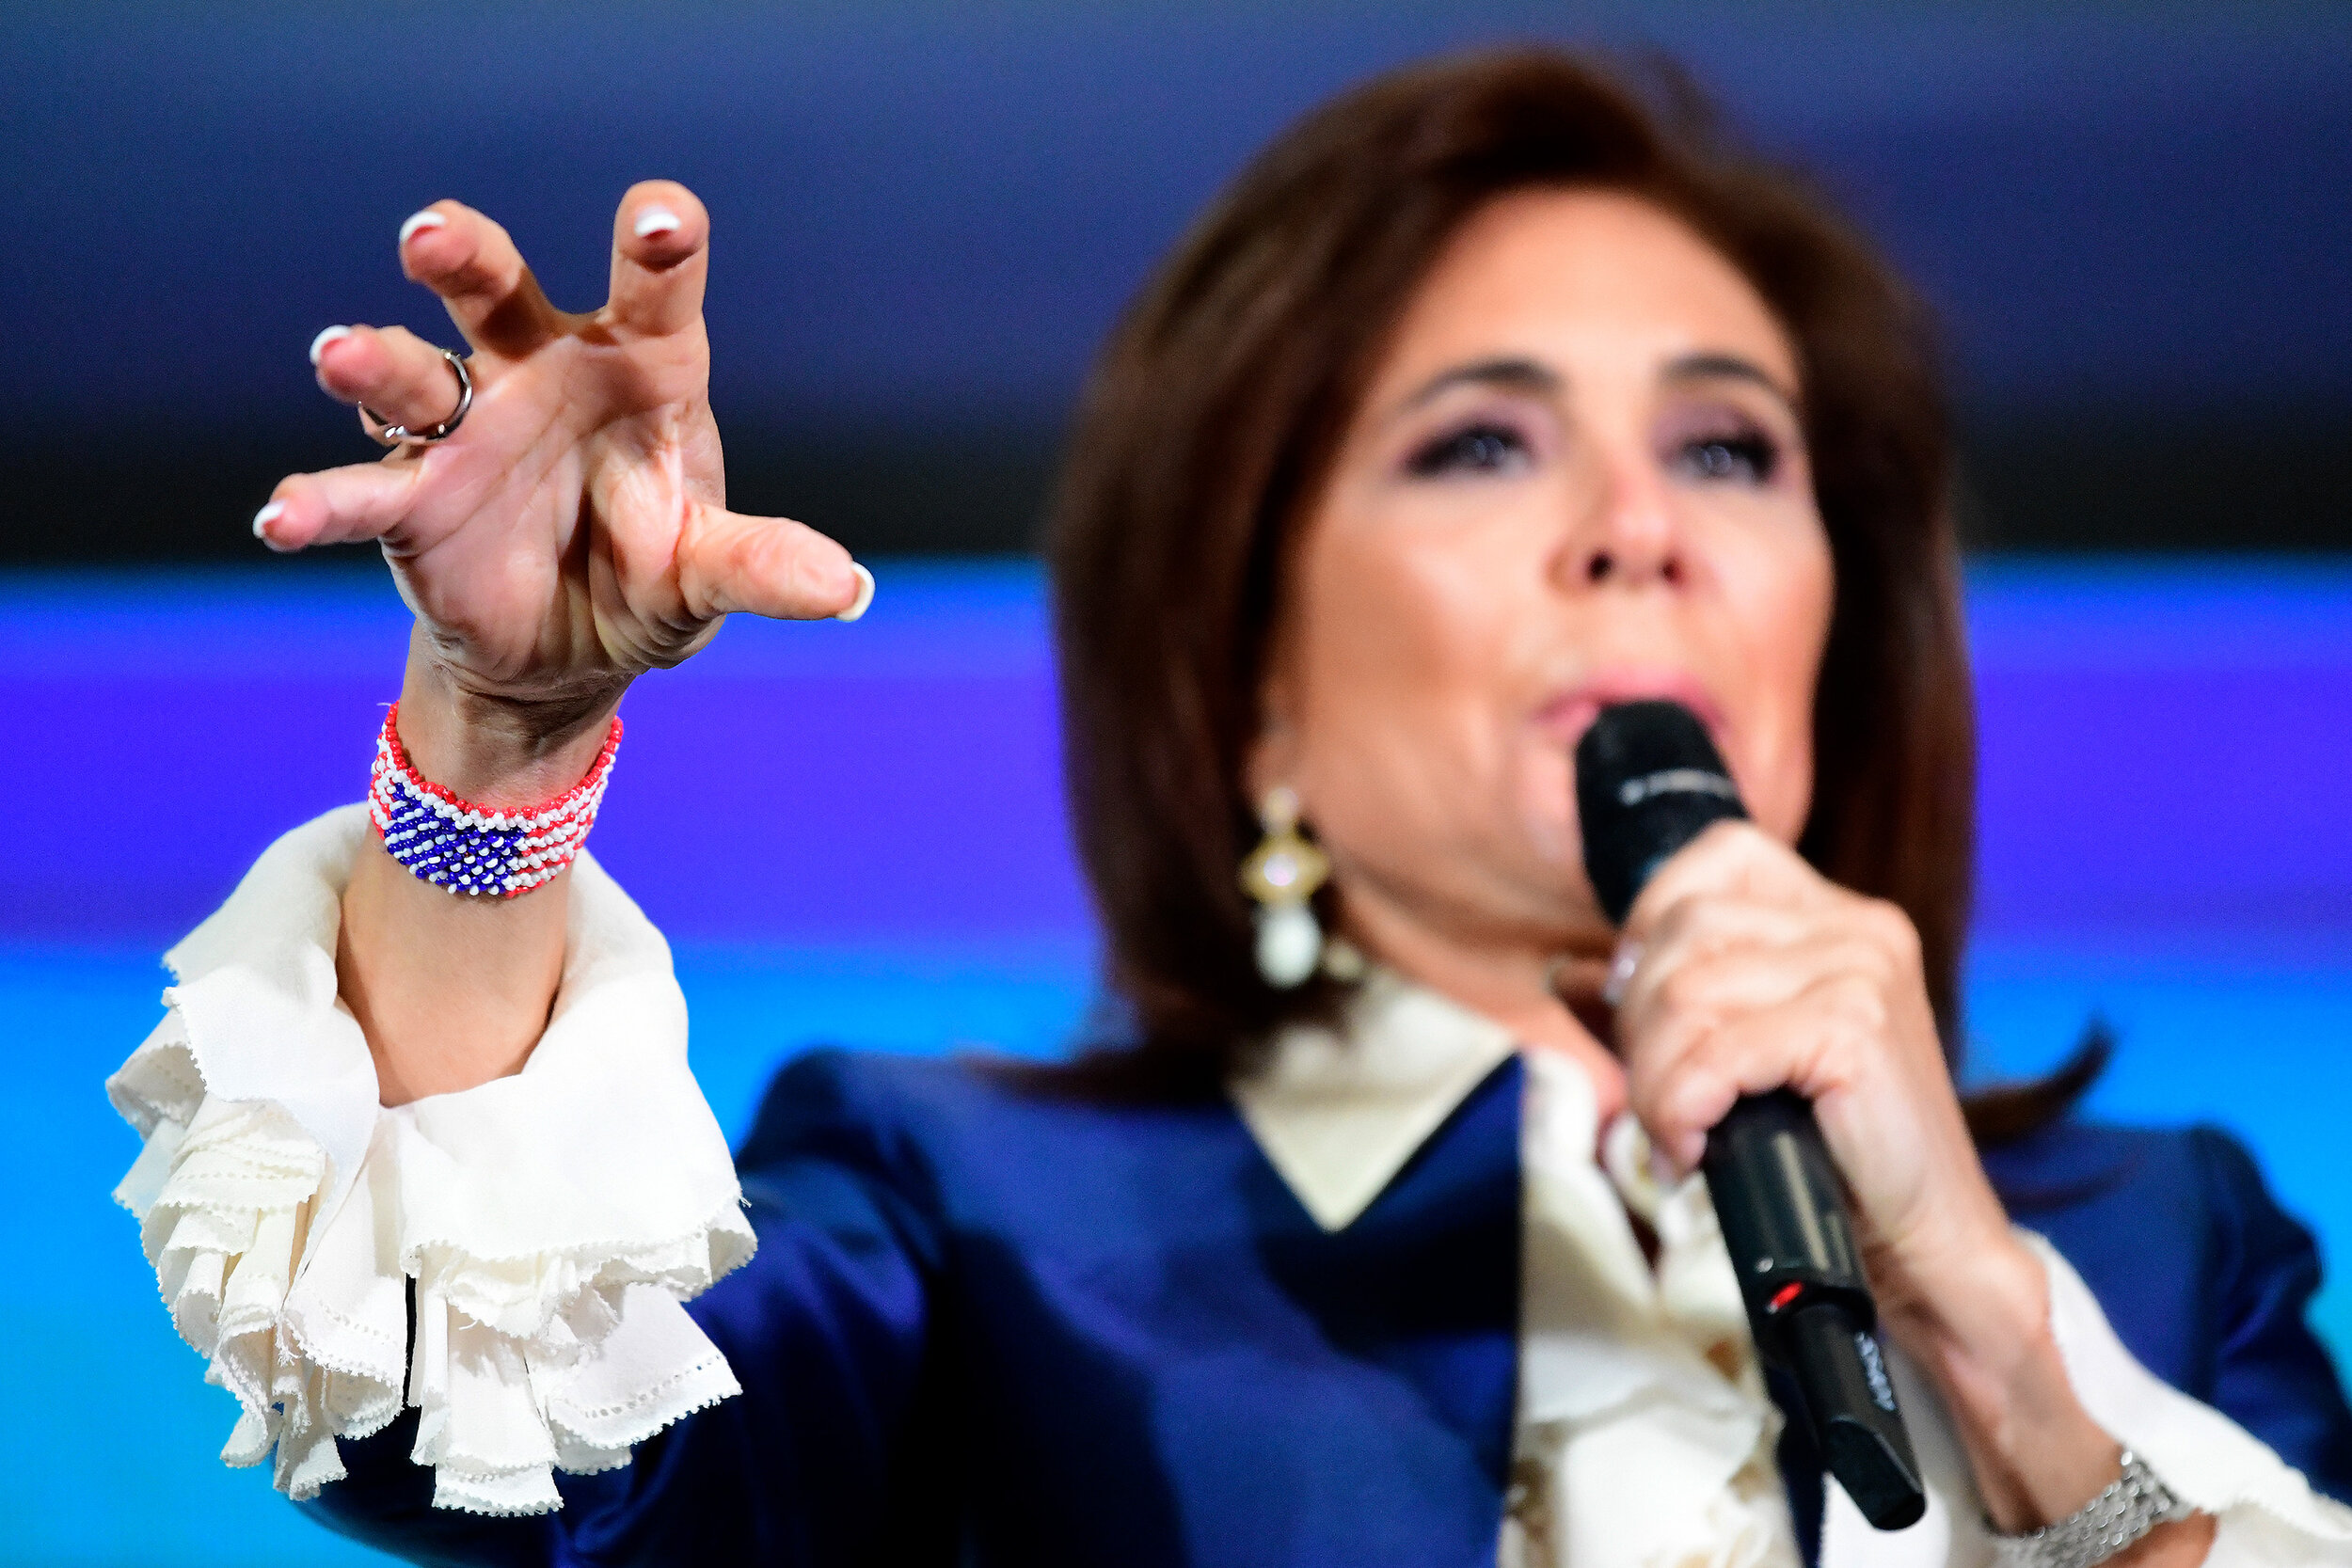  US Fox News Host and author Judge Jeanine Pirro addresses the Conservative Political Action Conference (CPAC) in Sydney, Friday, August 9, 2019. CAPC is being held in Australia for the first time. (AAP Image) 